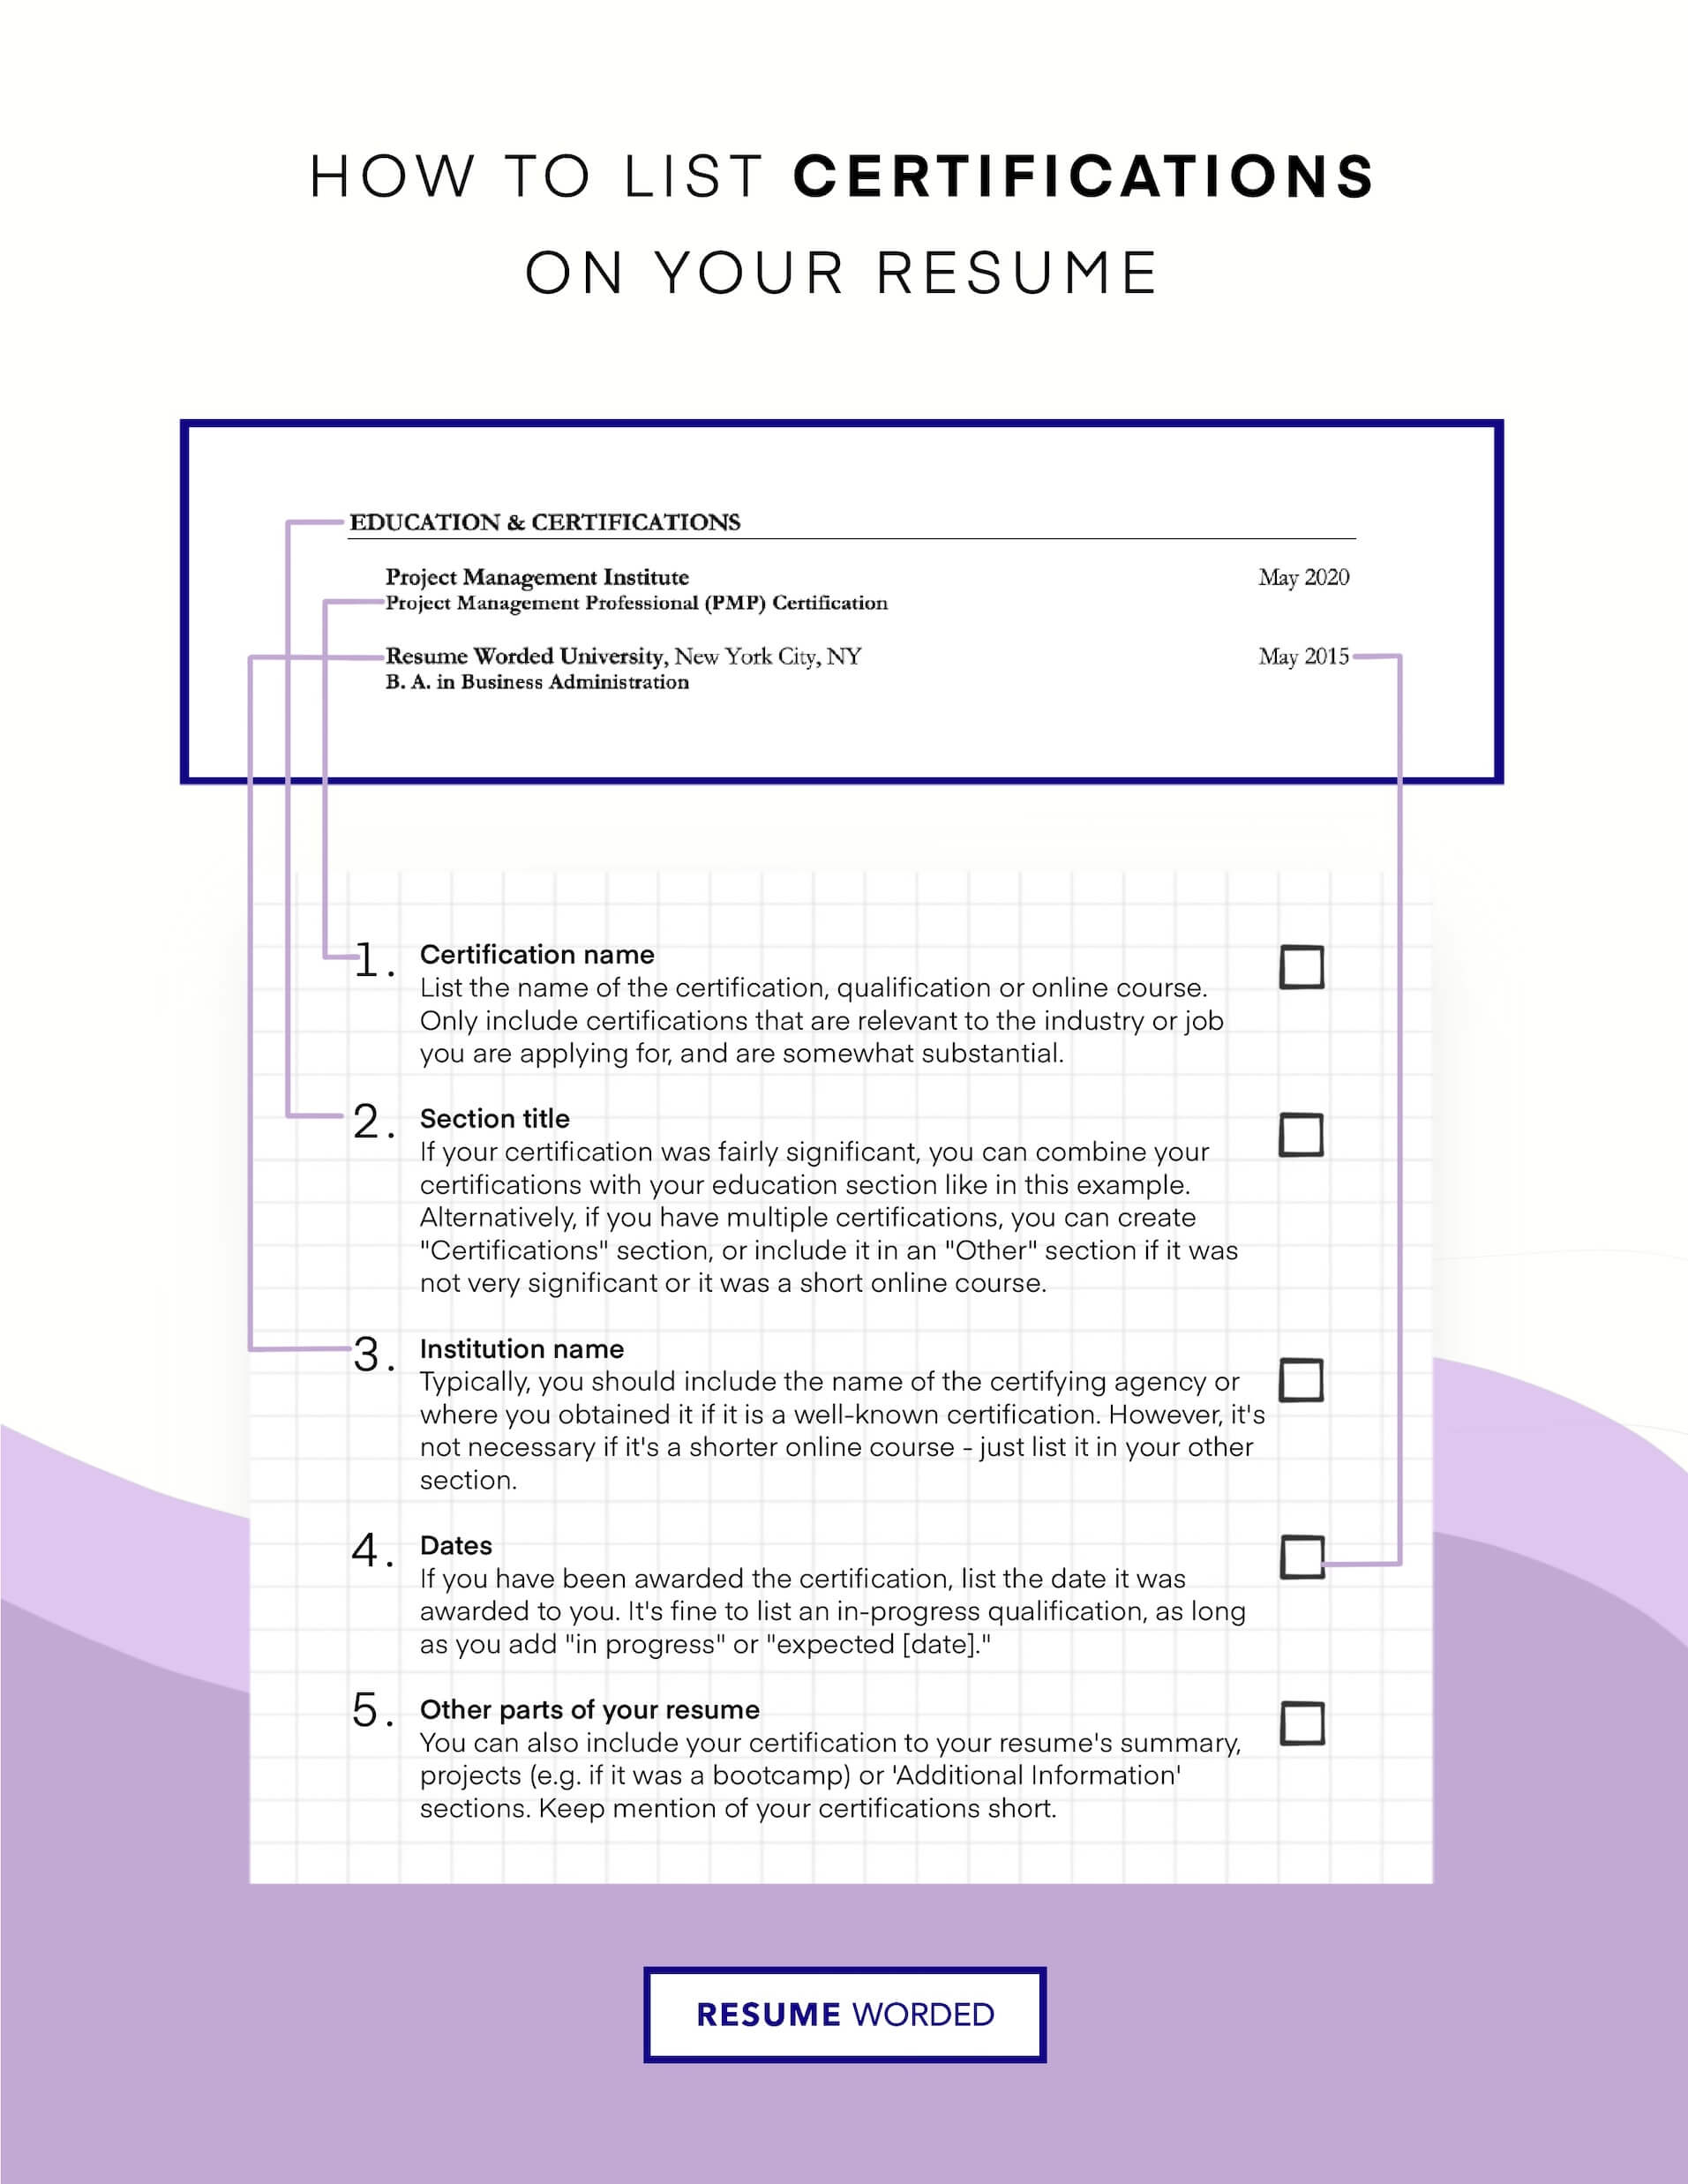 Highlight relevant certifications - QA (Quality Assurance) Manager Resume